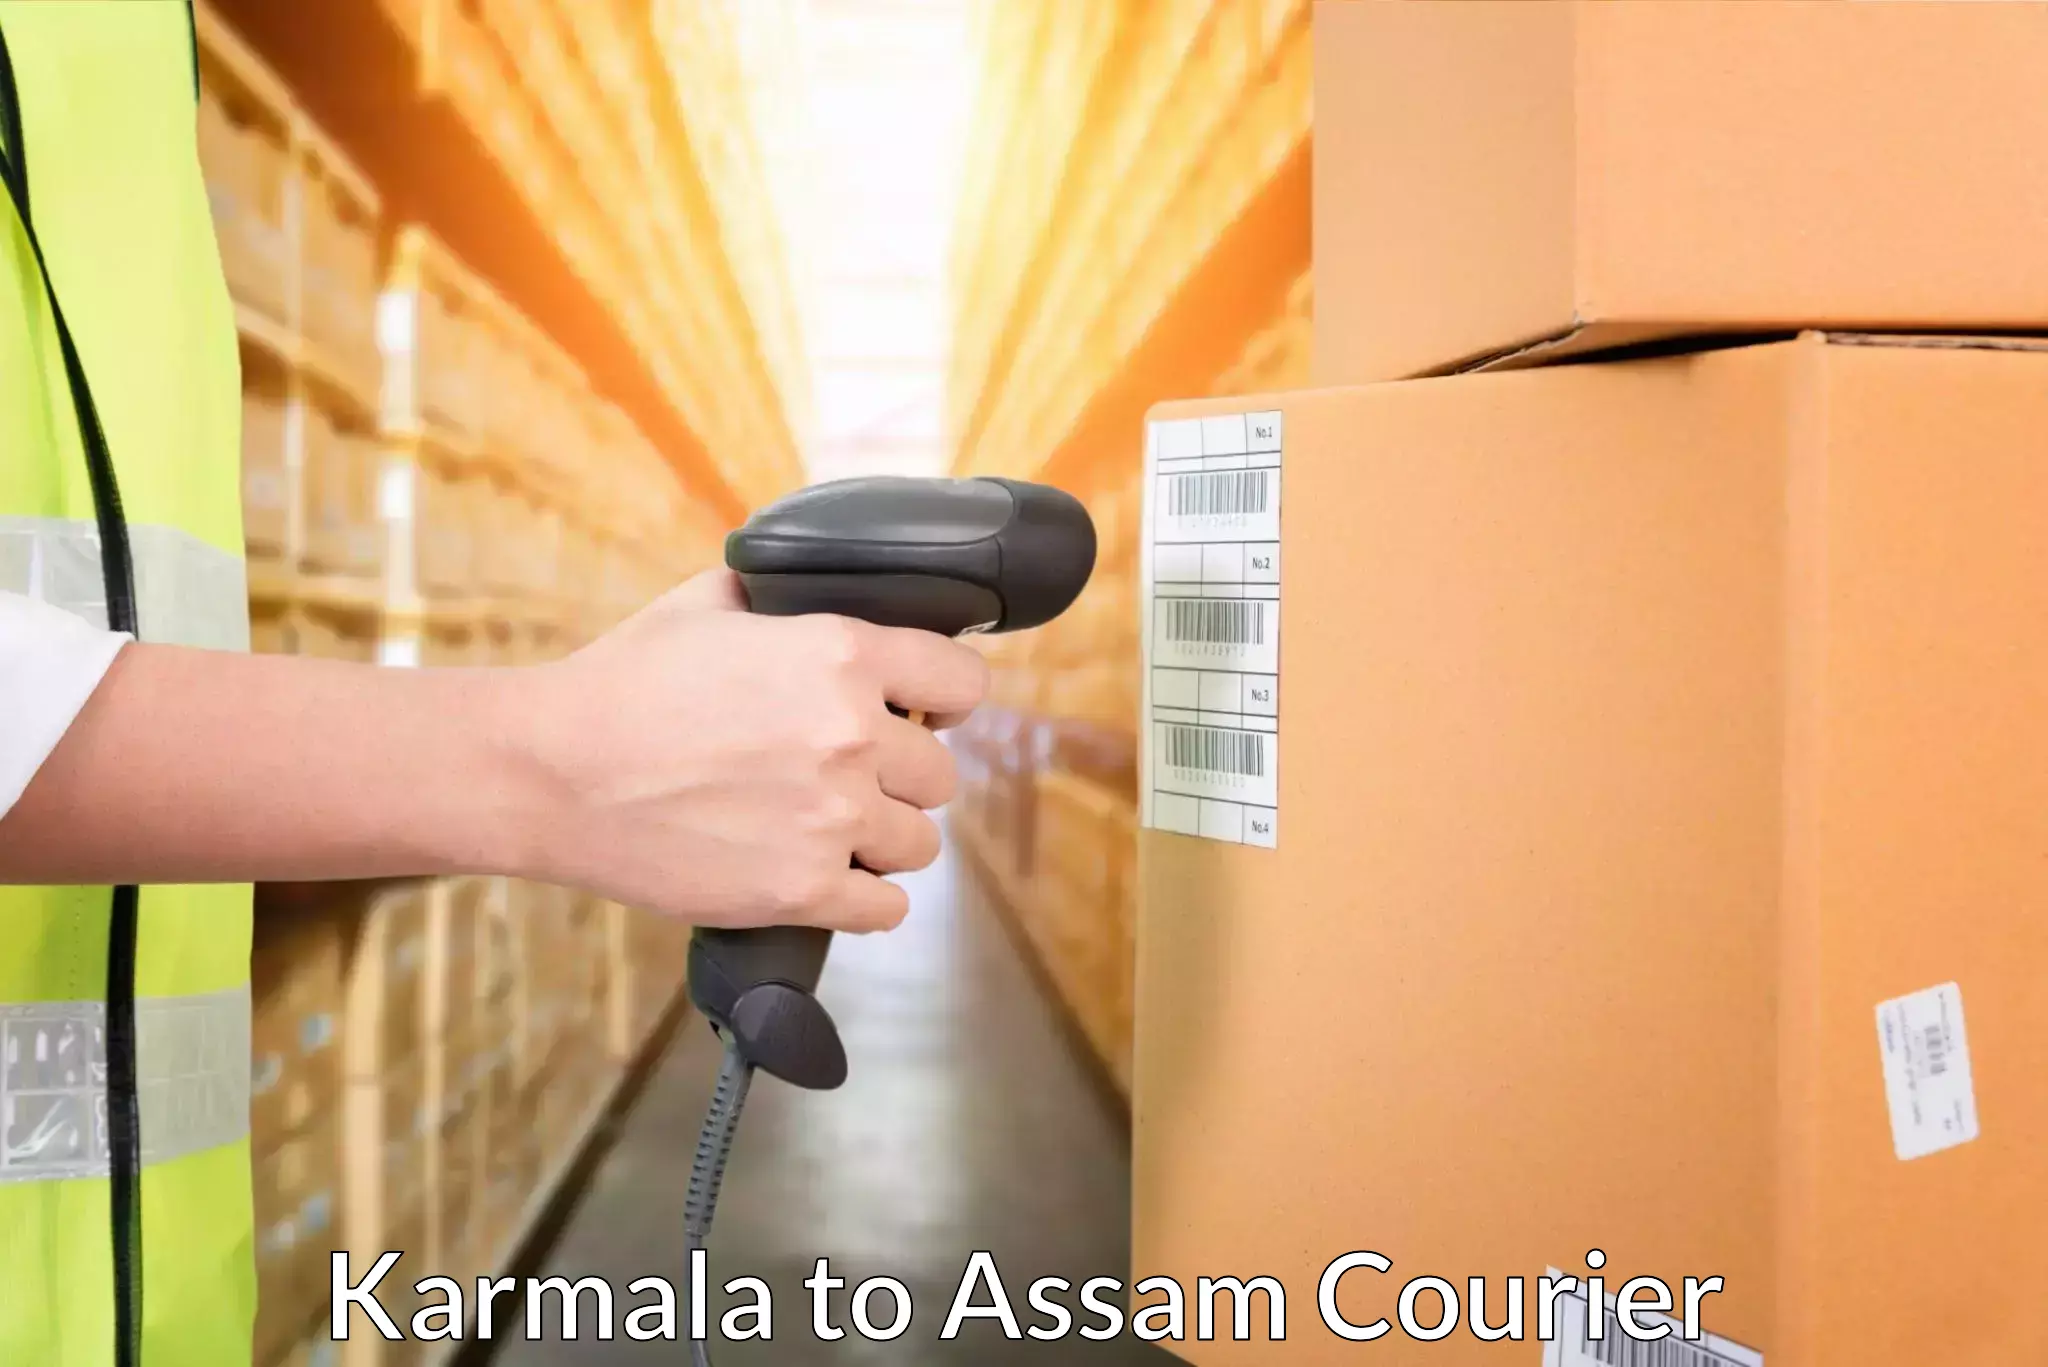 Next-day delivery options Karmala to Assam